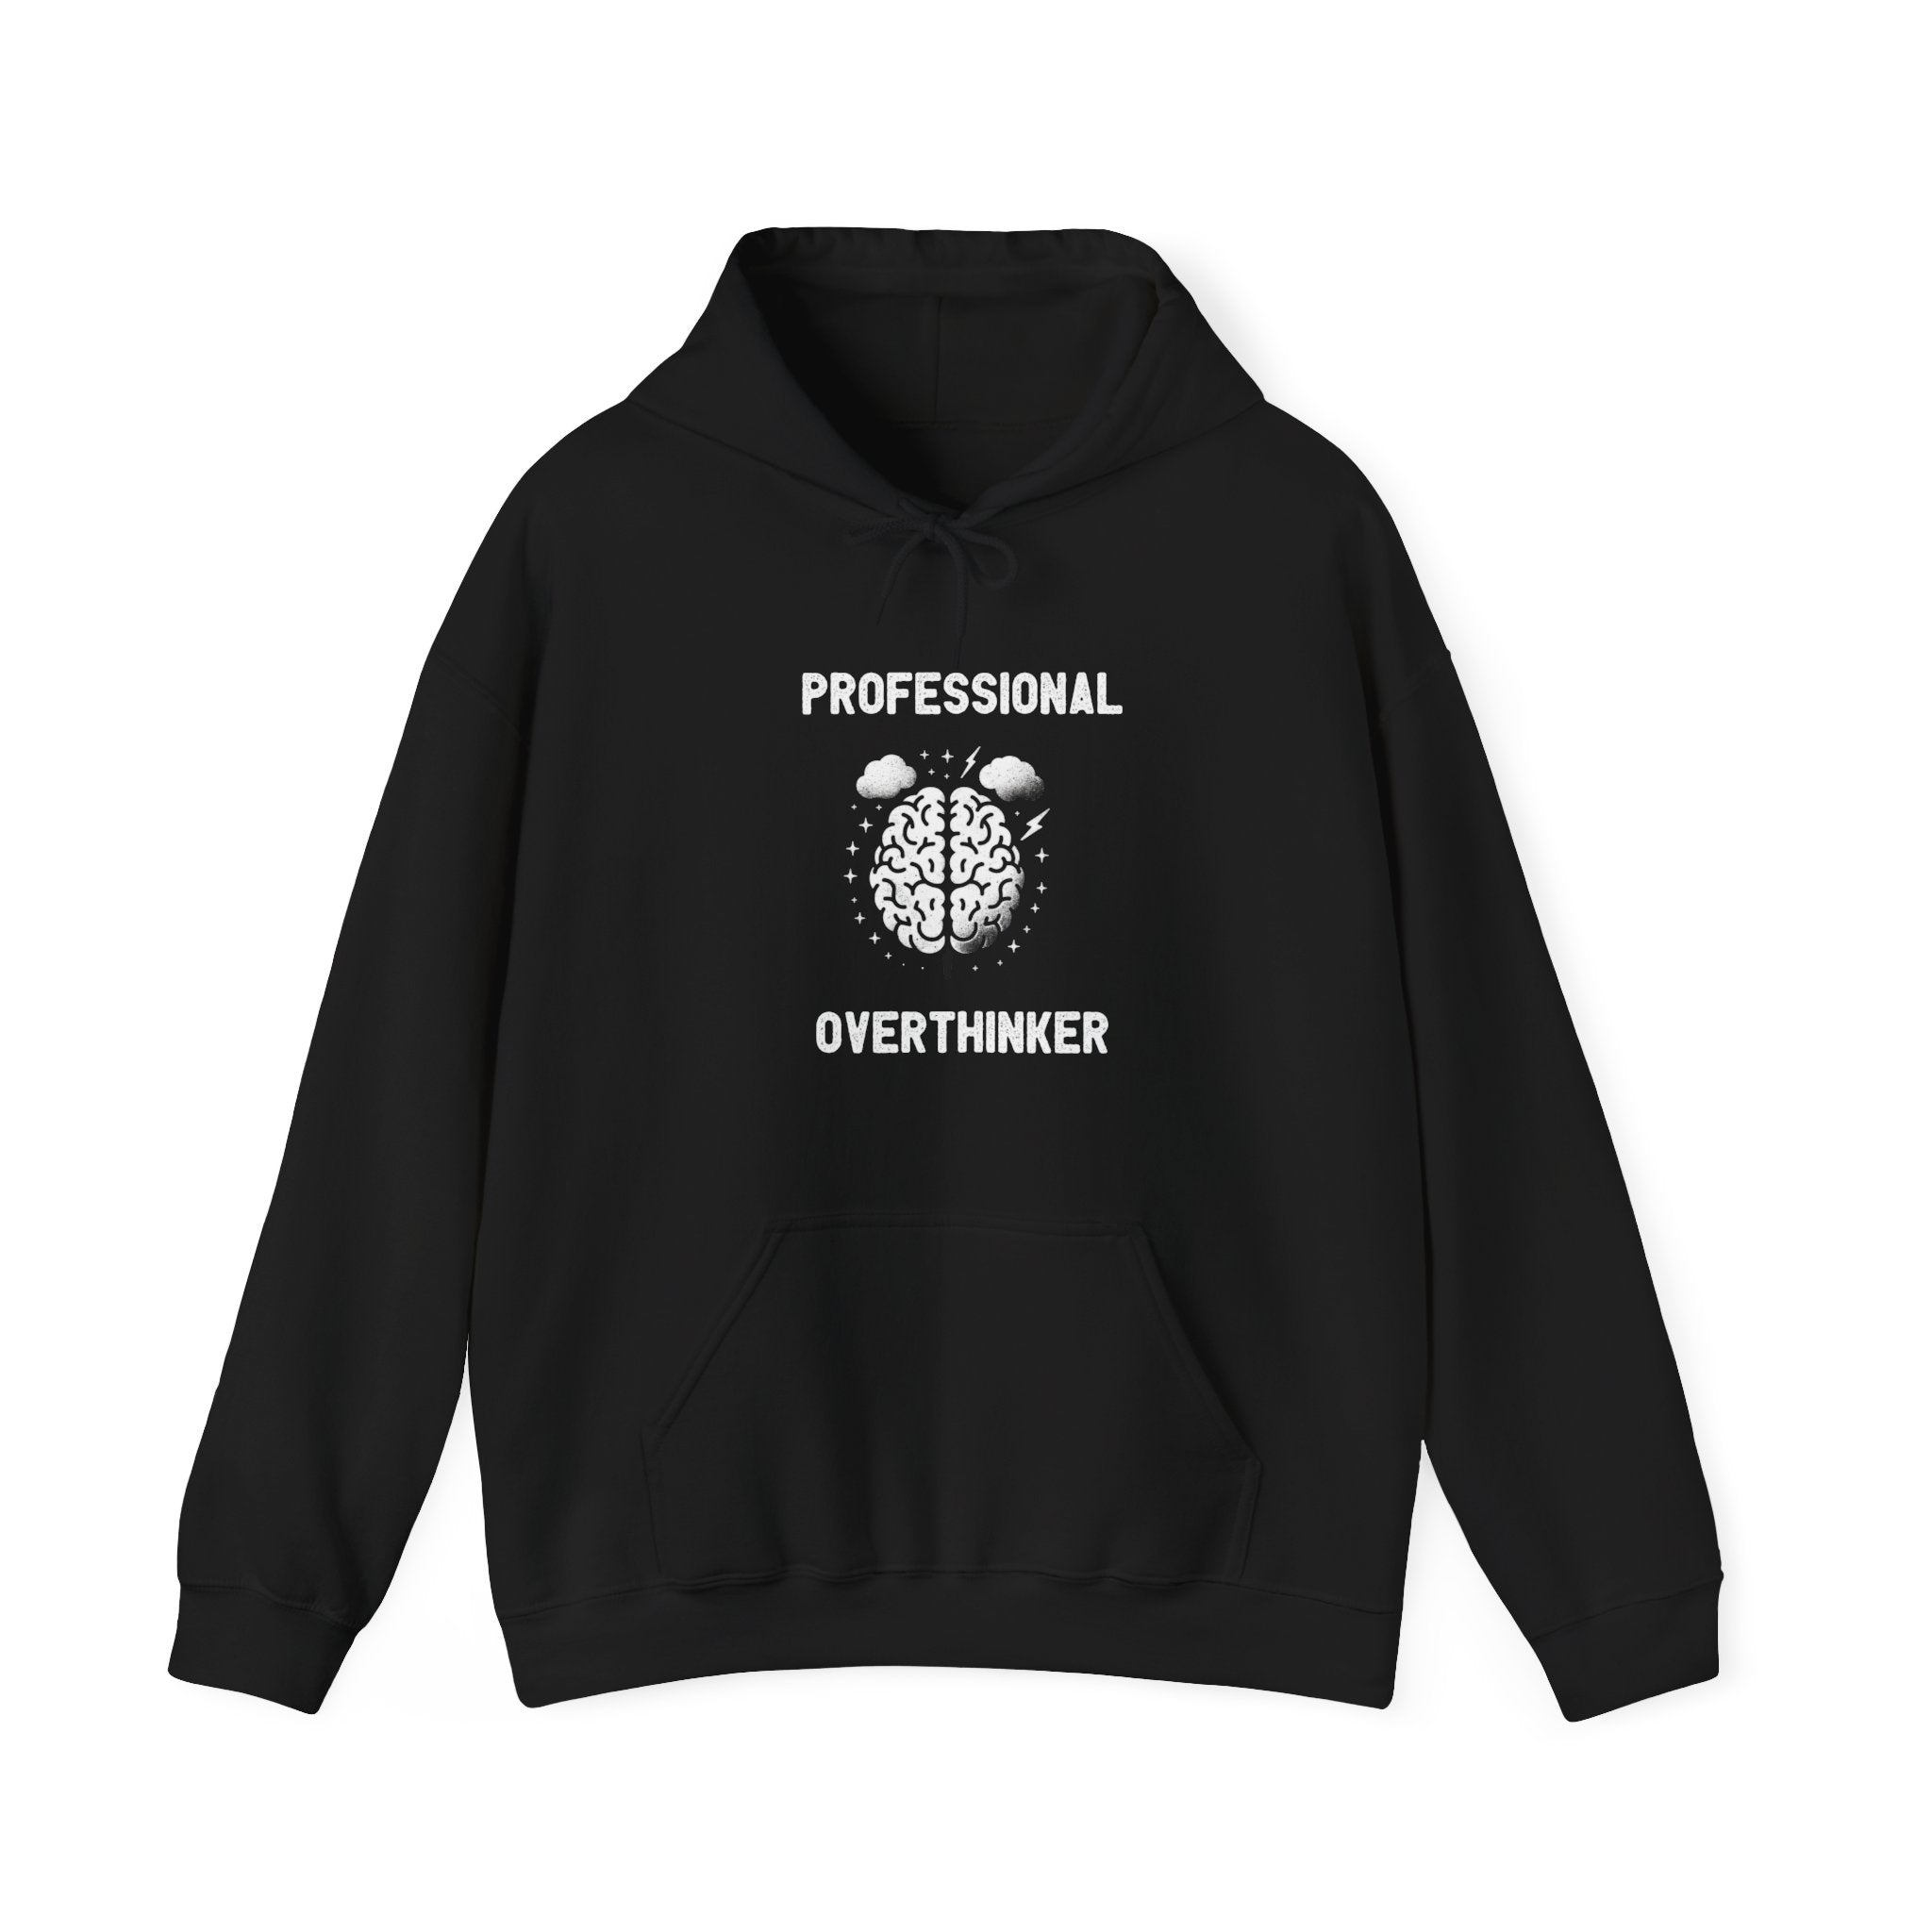 Professional Overthinker - Hooded Sweatshirt with the text "Professional Overthinker" and a graphic of a brain in the center, blending style and comfort effortlessly.